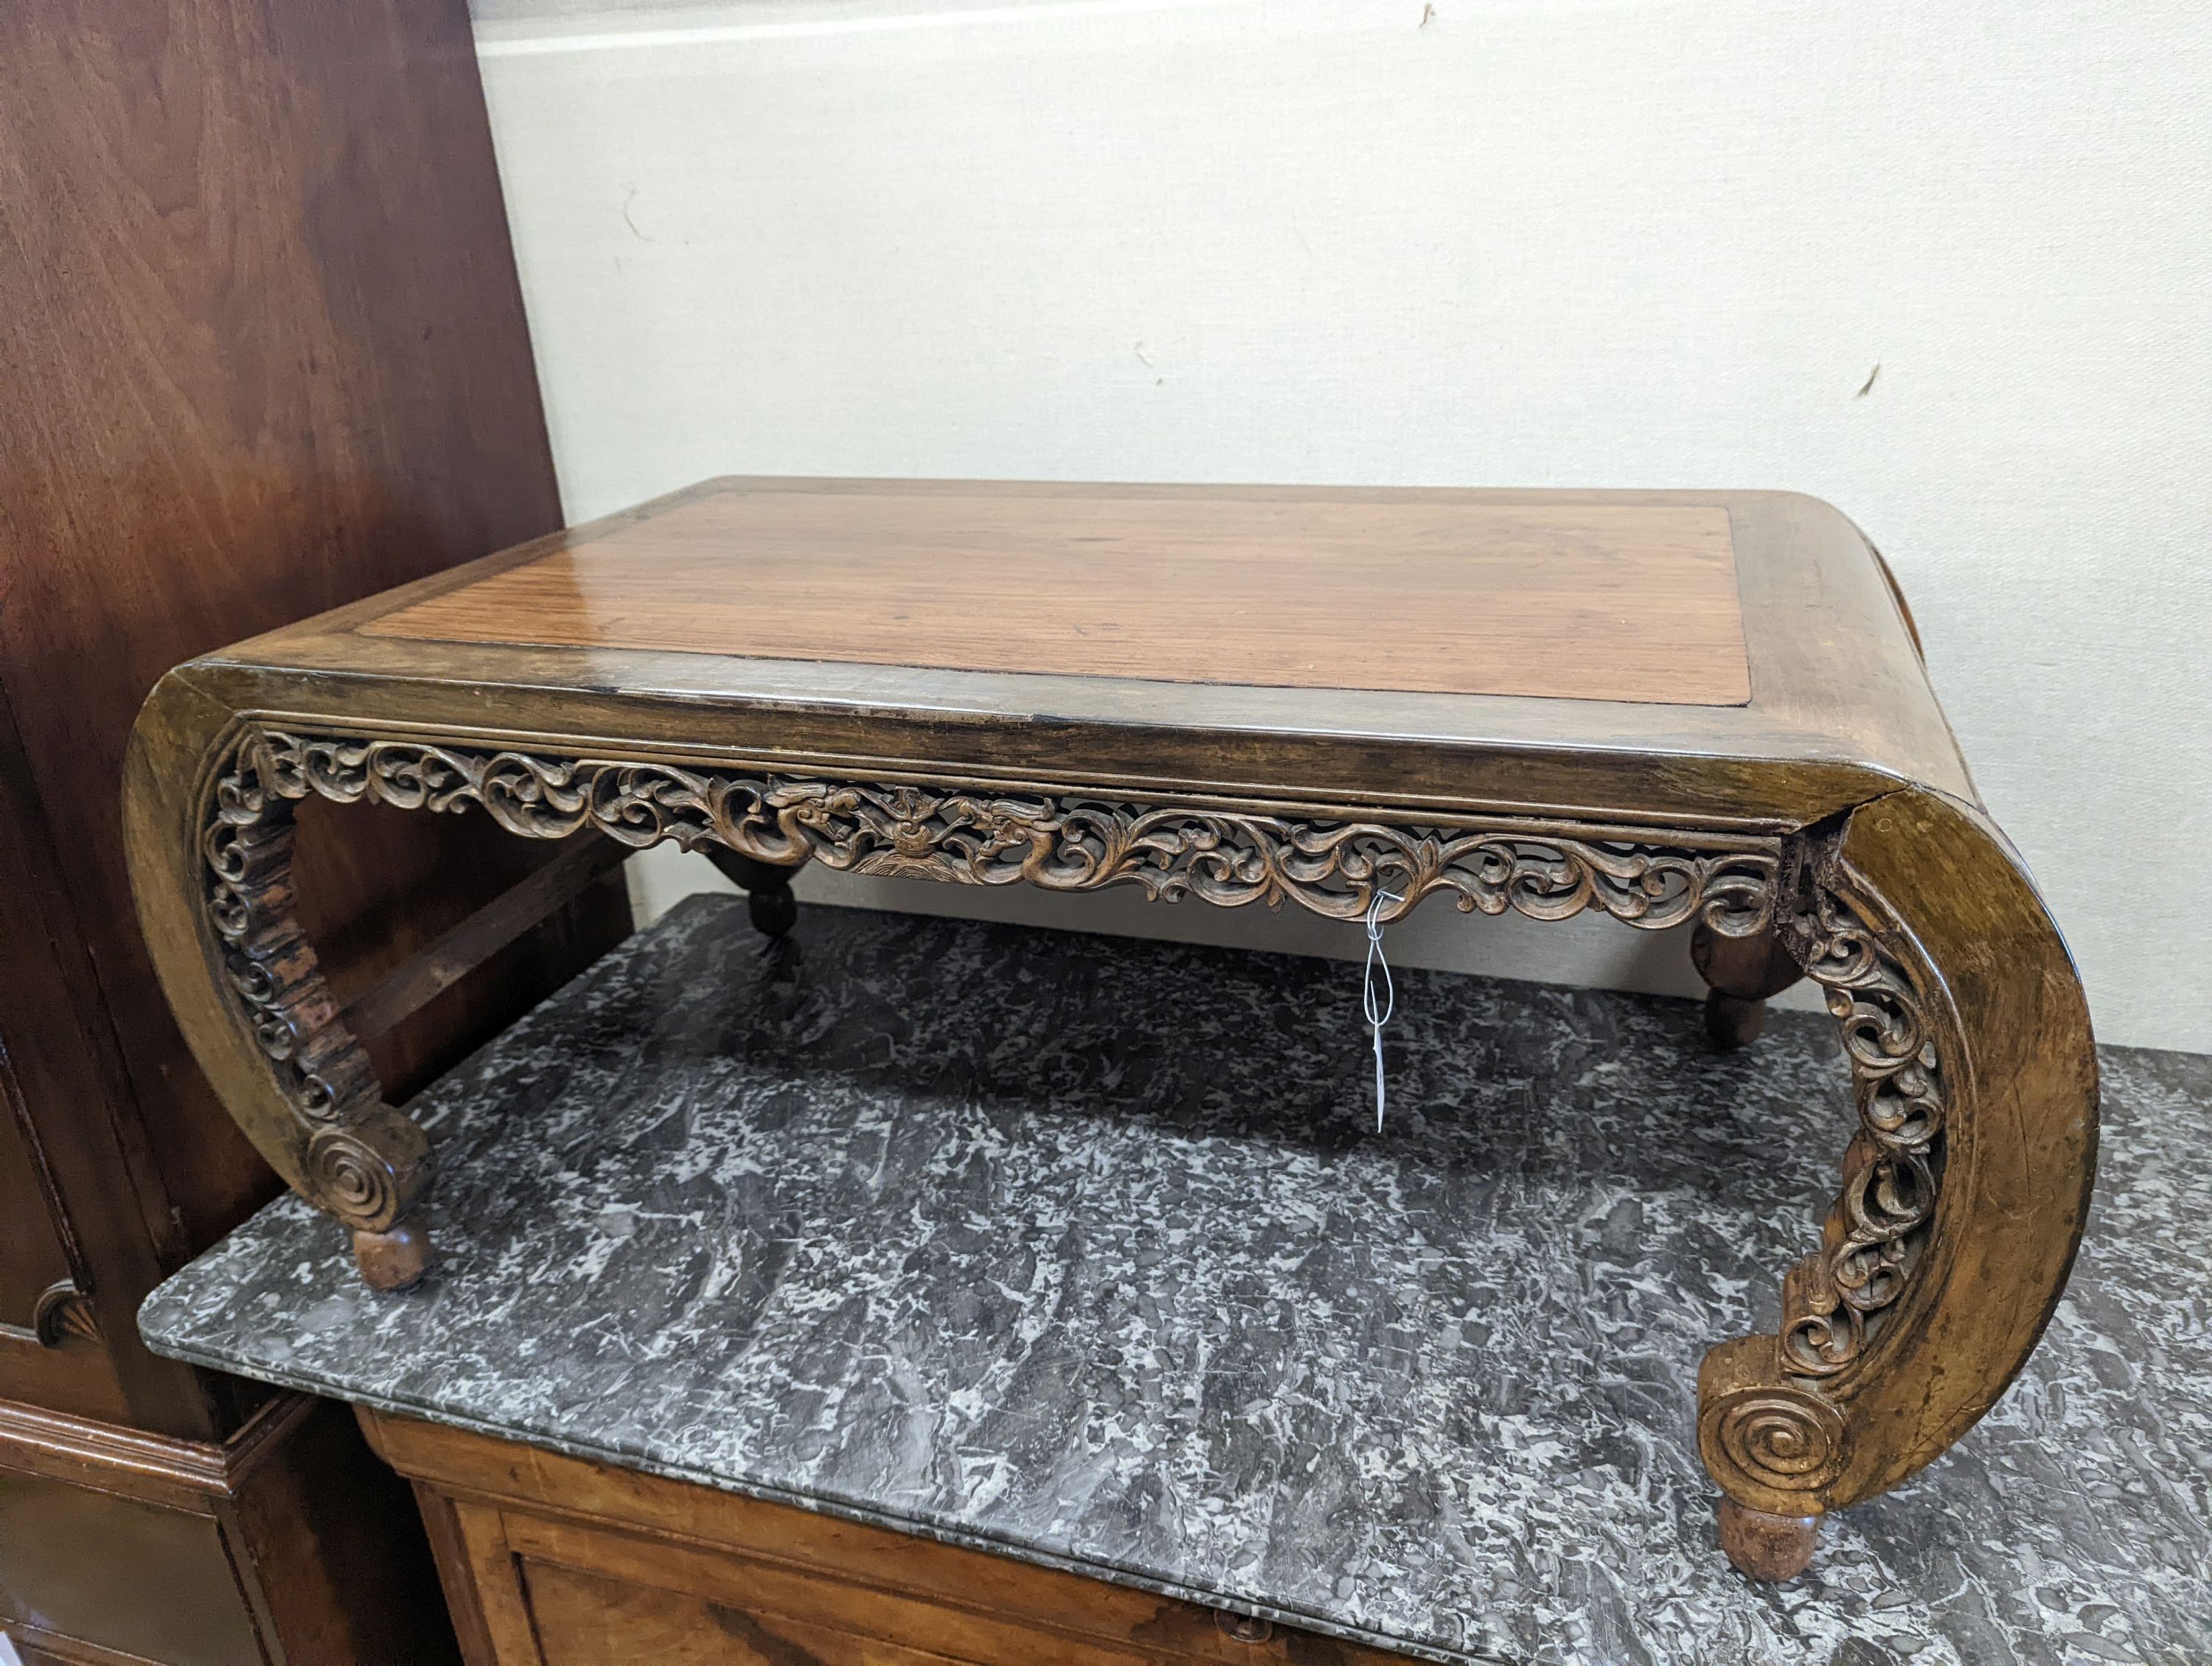 A Chinese rectangular carved hardwood low table, length 93cm, depth 49cm, height 39cm